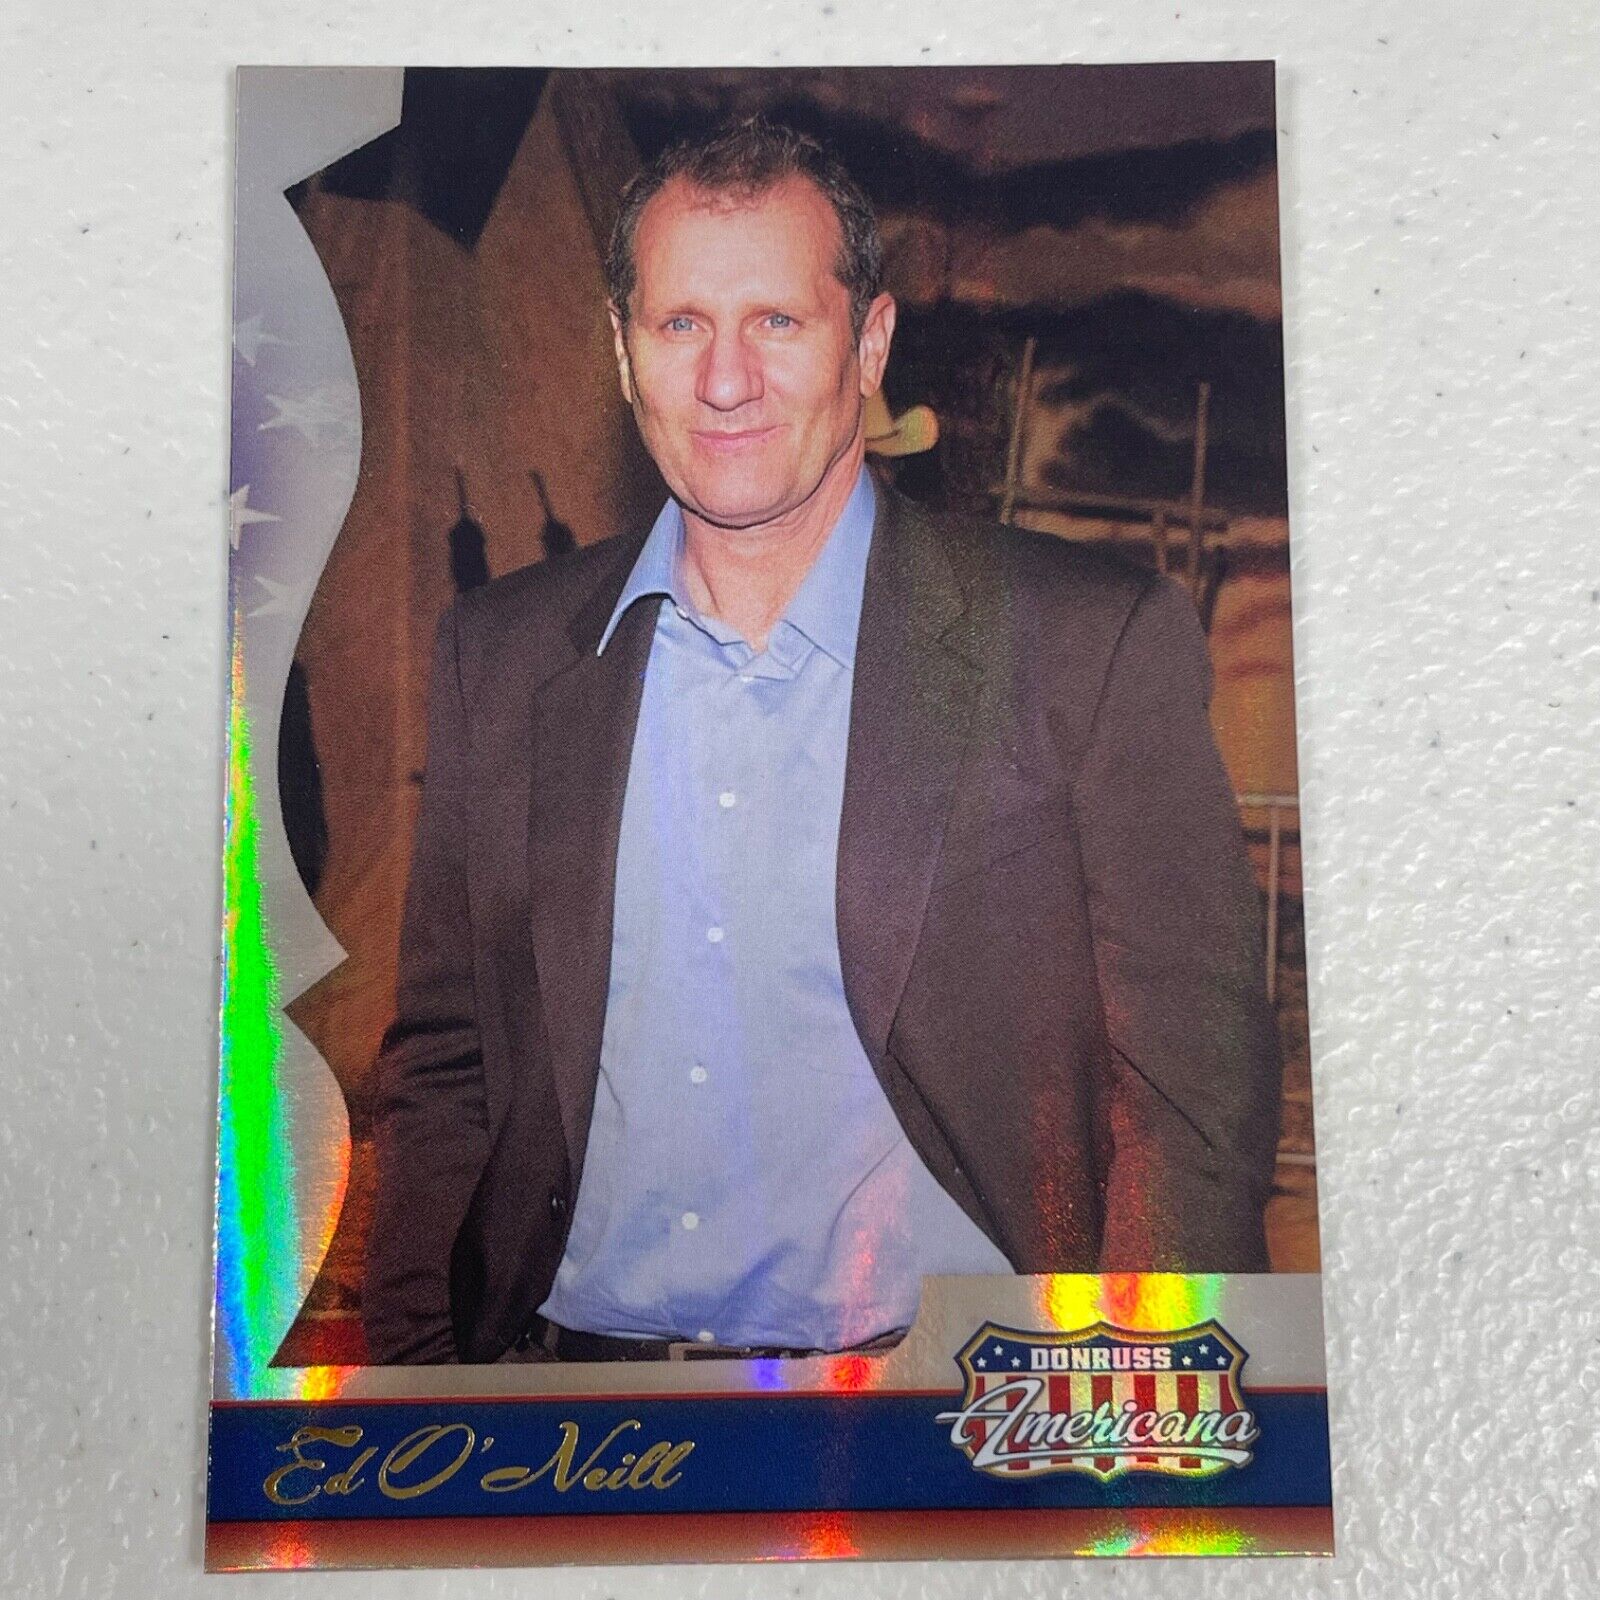 2007 Donruss Americana ED O'NEILL Foil Card #87 Married With Children Actor